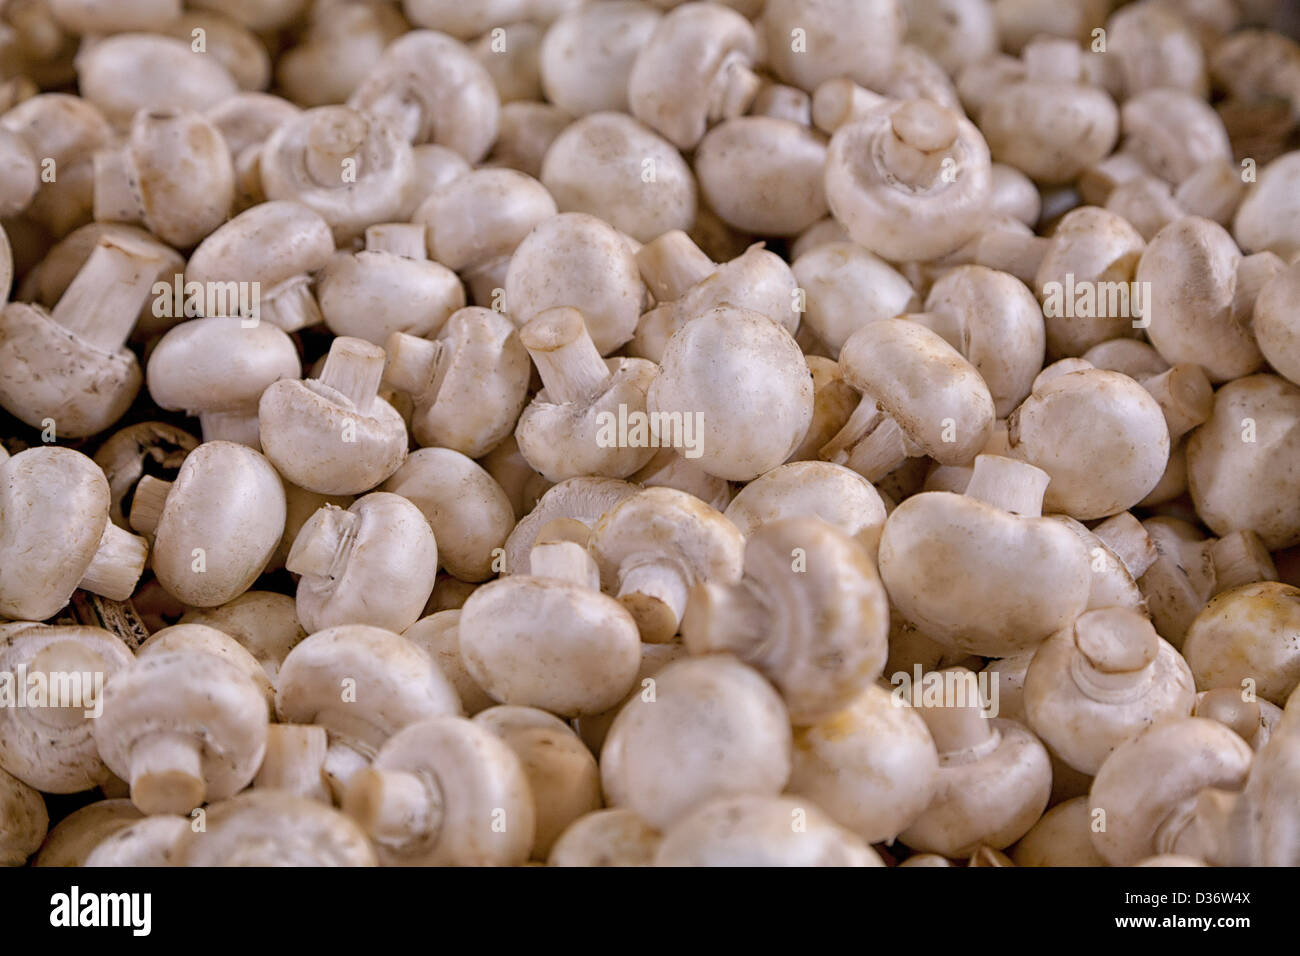 white button mushrooms piled up and ready for sale at the farmer's market Stock Photo